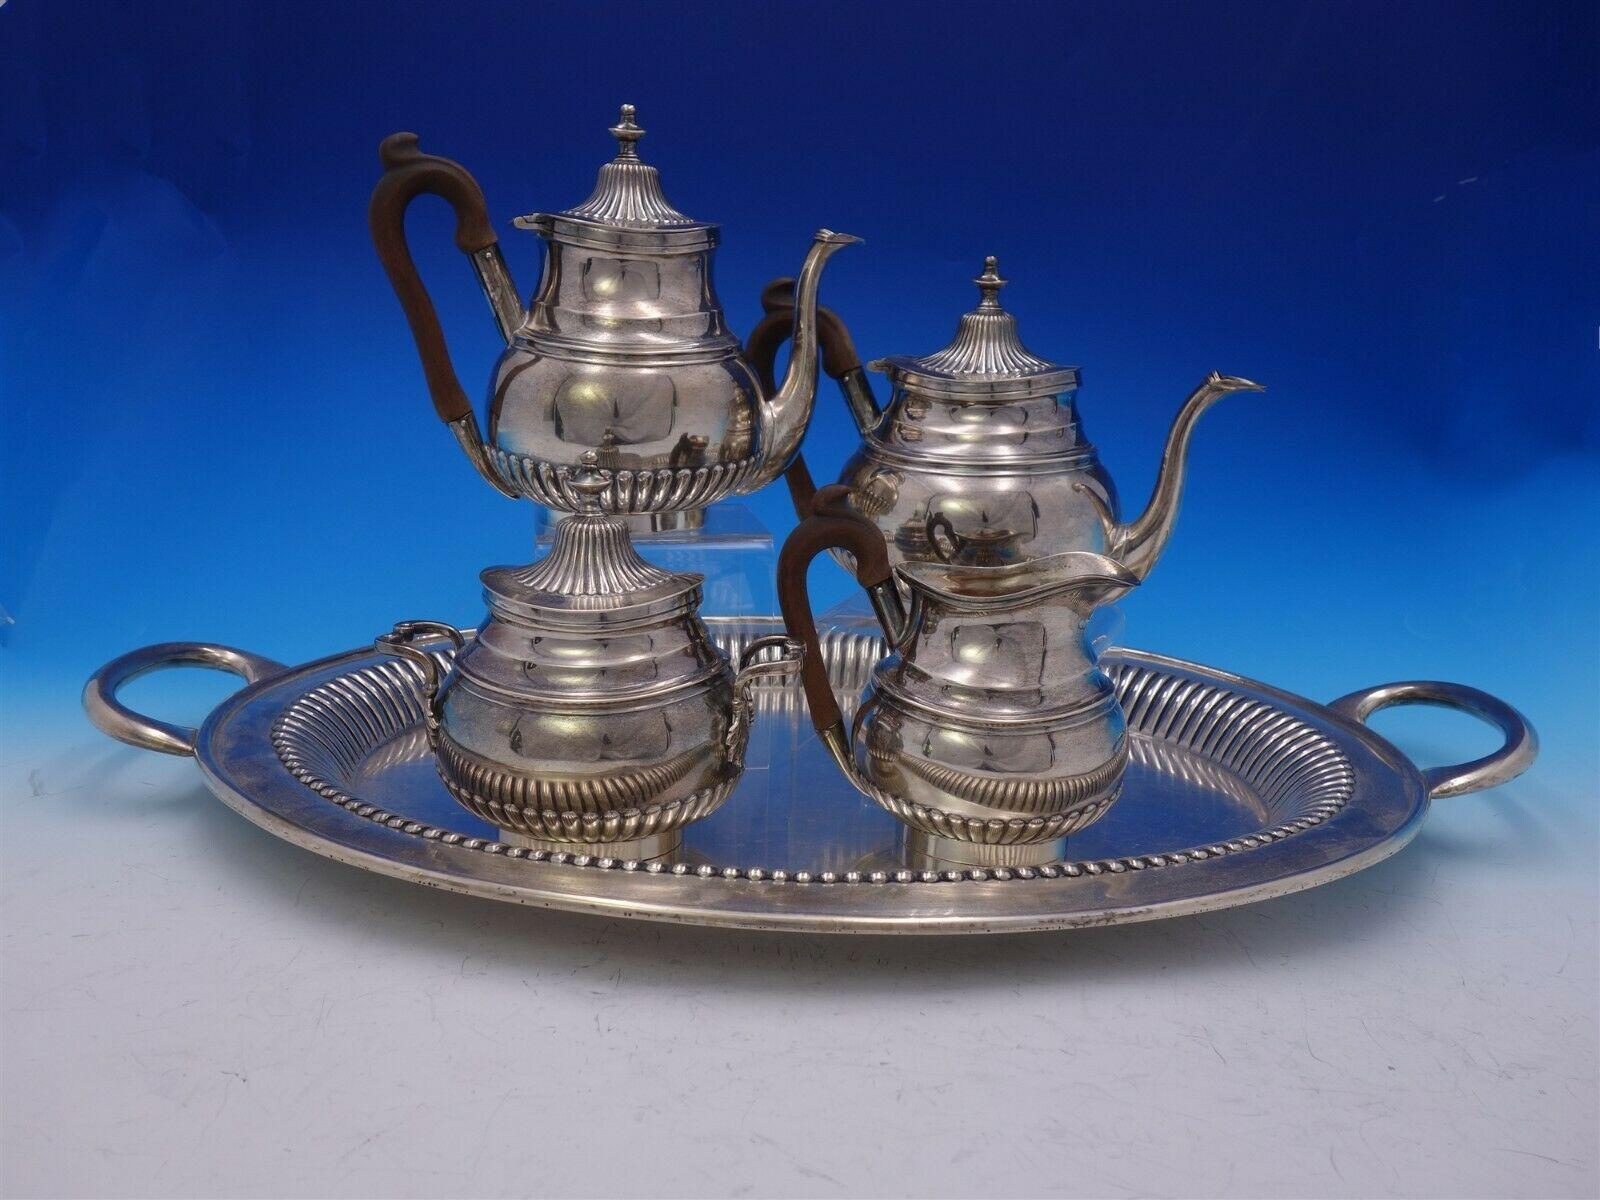 Wonderful Portuguese .833 silver 5-piece tea set with fluted / ribbed design. This set includes:

1 - Coffee pot (with wood handle): Measures: 8 1/2